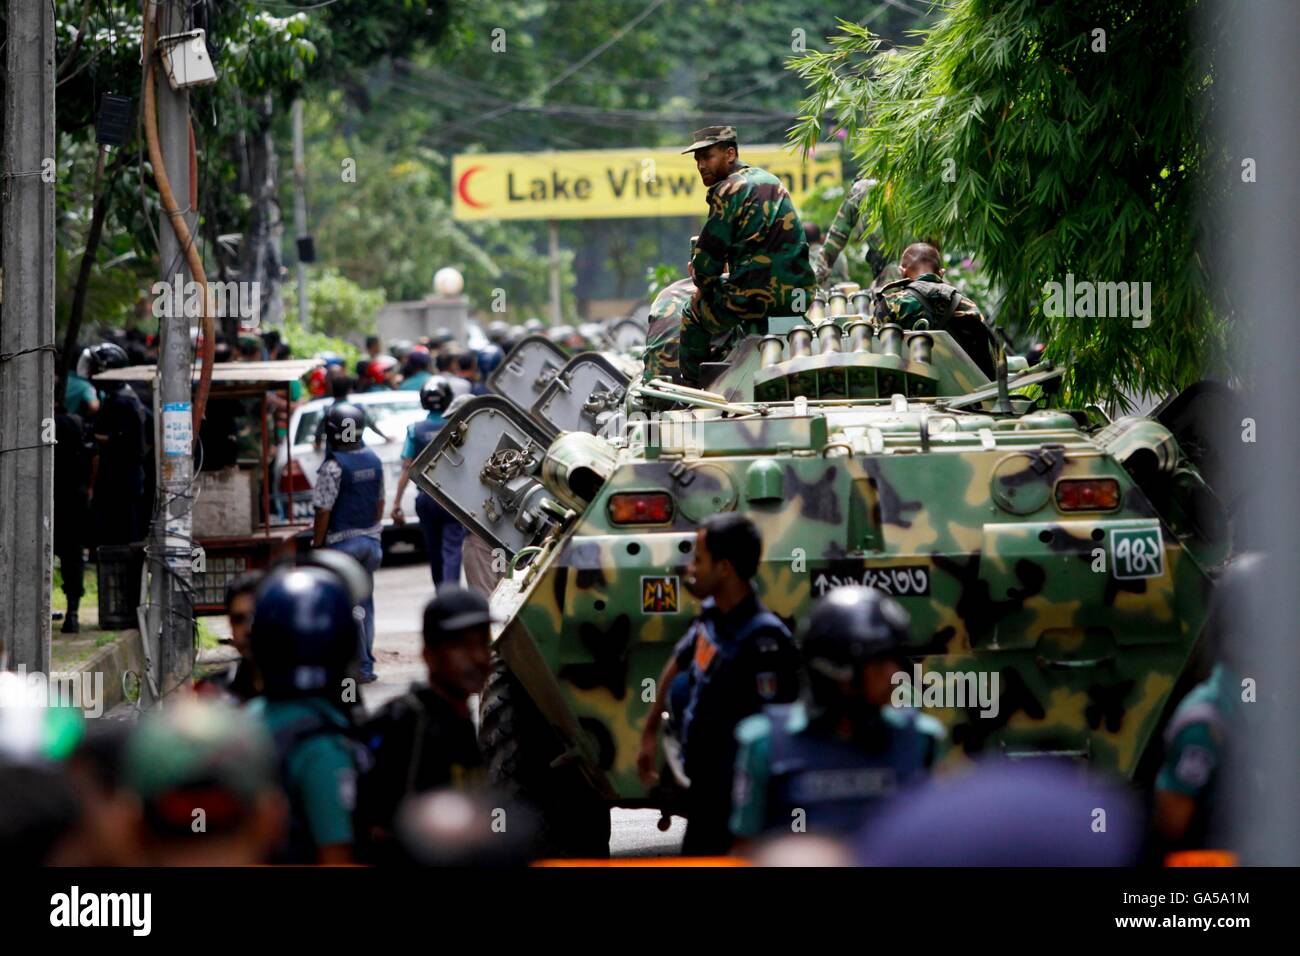 Dhaka, Bangladesh. 2nd July, 2016. After rescue operation Army soldiers stand near the Holey Artisan Bakery. Six gunmen have been shot and killed during an operation to end a hostage situation by military commandos, while the gunmen killed two policemen earlier and thirteen hostages have been rescued. Credit:  K M Asad/ZUMA Wire/Alamy Live News Stock Photo